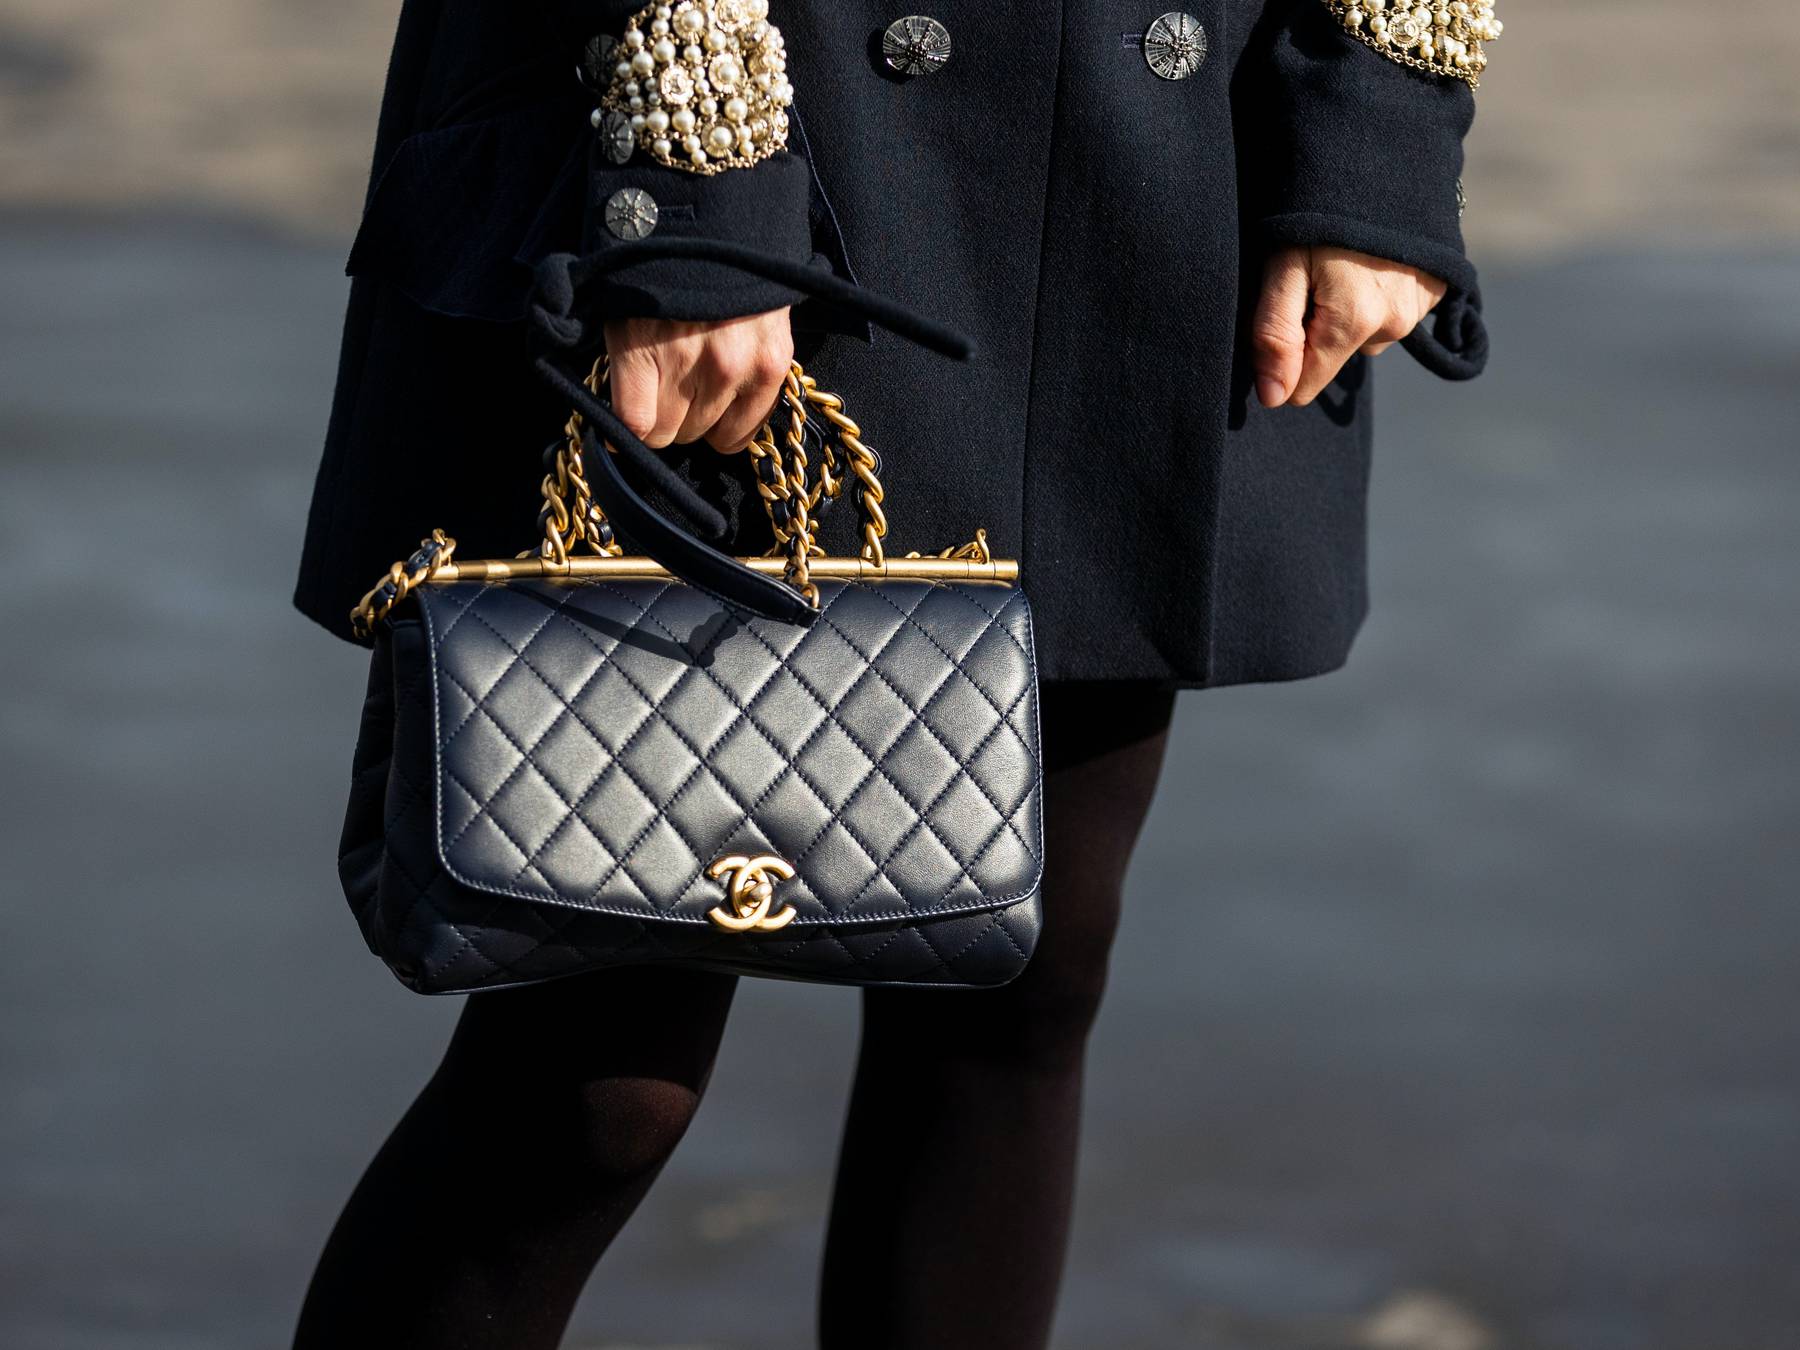 Increasing prices in Covid-19? Chanel, Louis Vuitton show it works